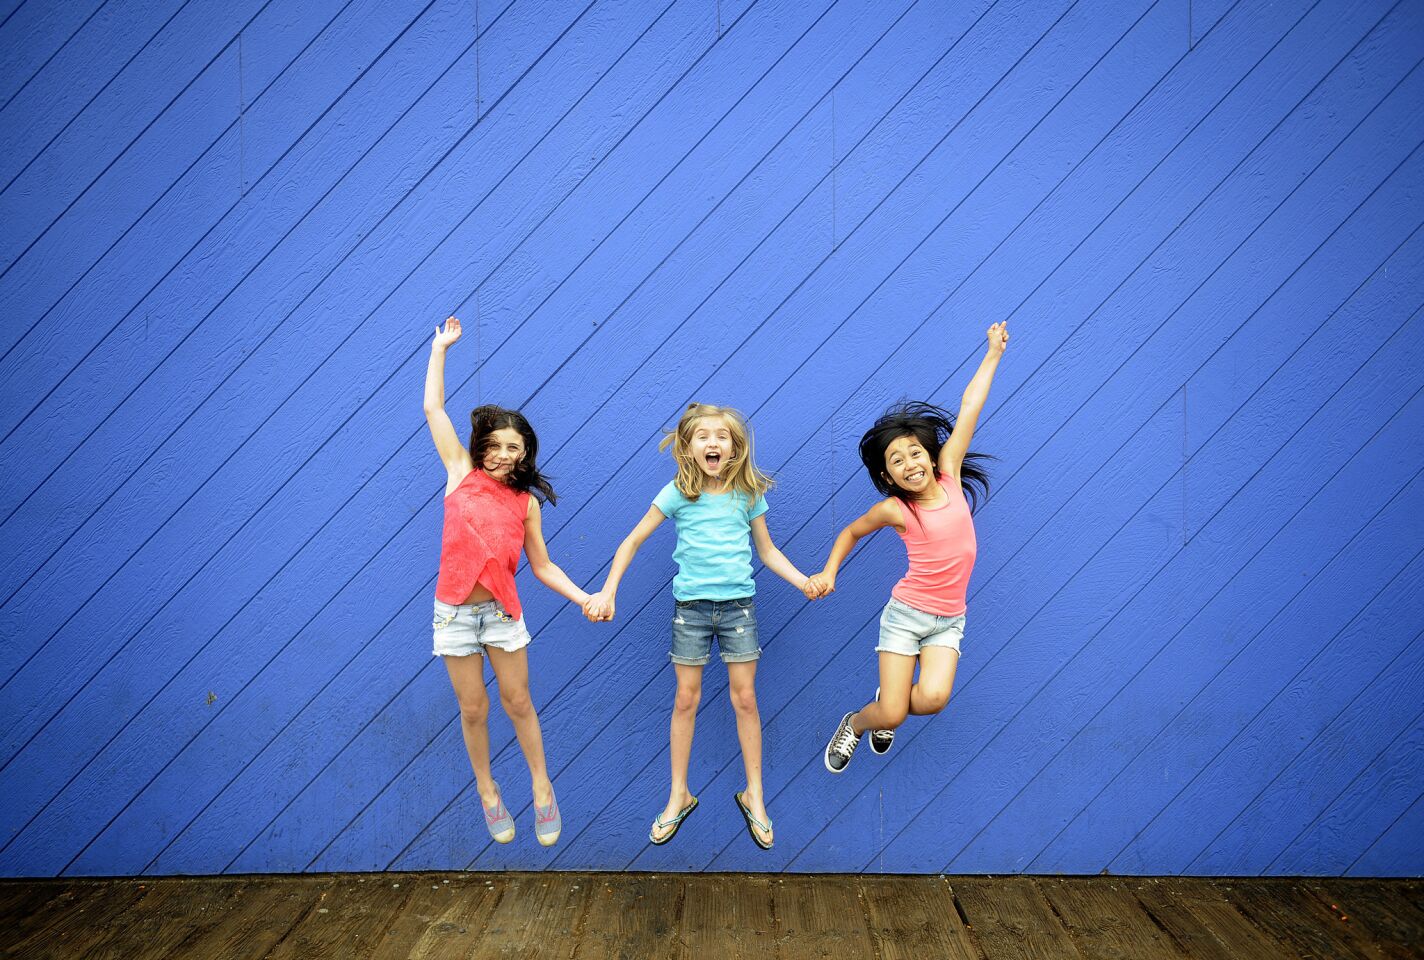 Mia Sinclair Jenness, left, Mabel Tyler and Gabby Gutierrez alternate playing the title role in the musical adaptation of Roald Dahl's "Matilda" at the Ahmanson Theatre. The three are shown during a day at Santa Monica Pier on June 16, 2015.